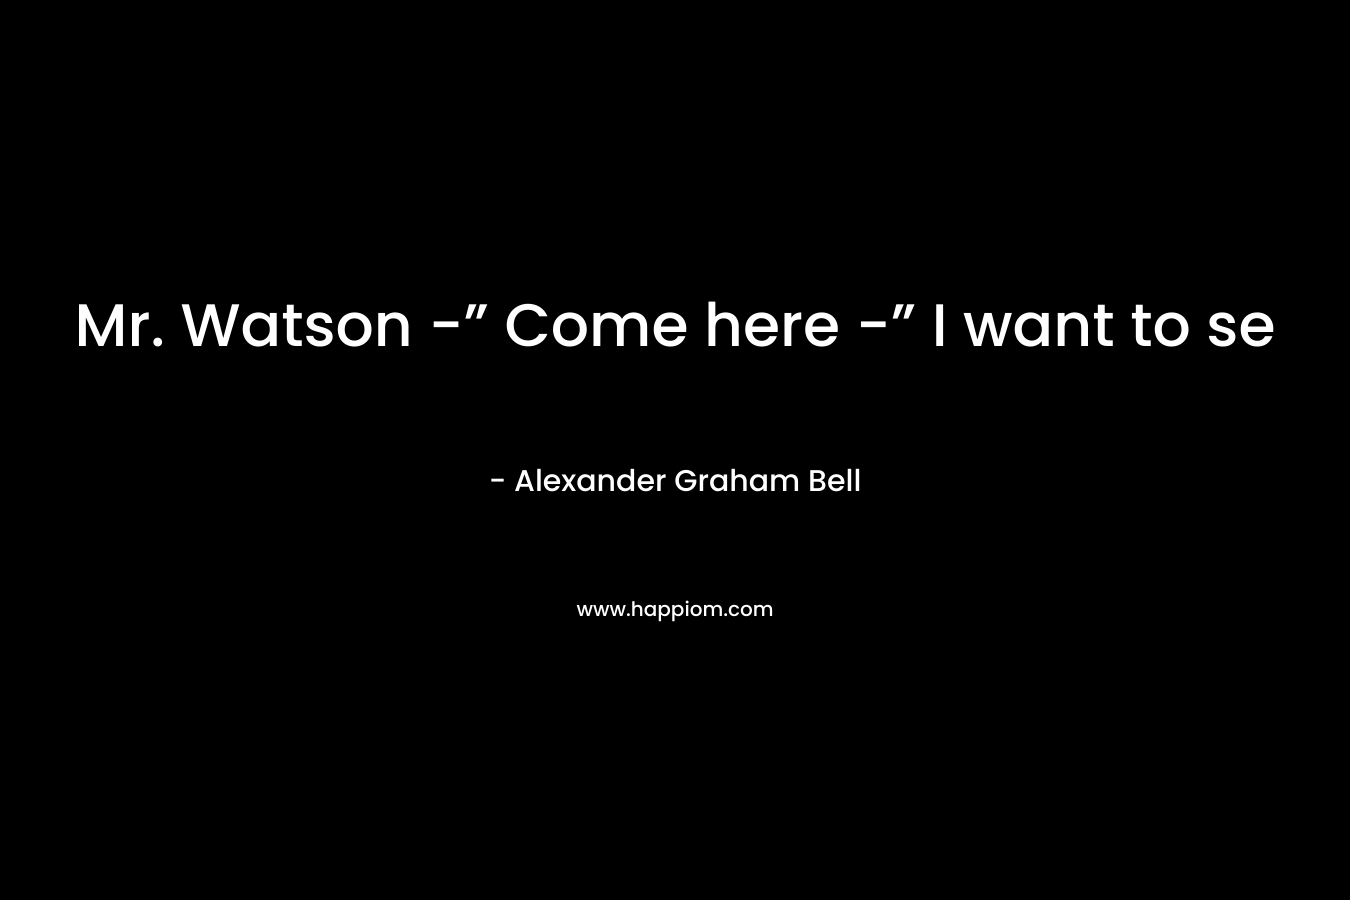 Mr. Watson -” Come here -” I want to se